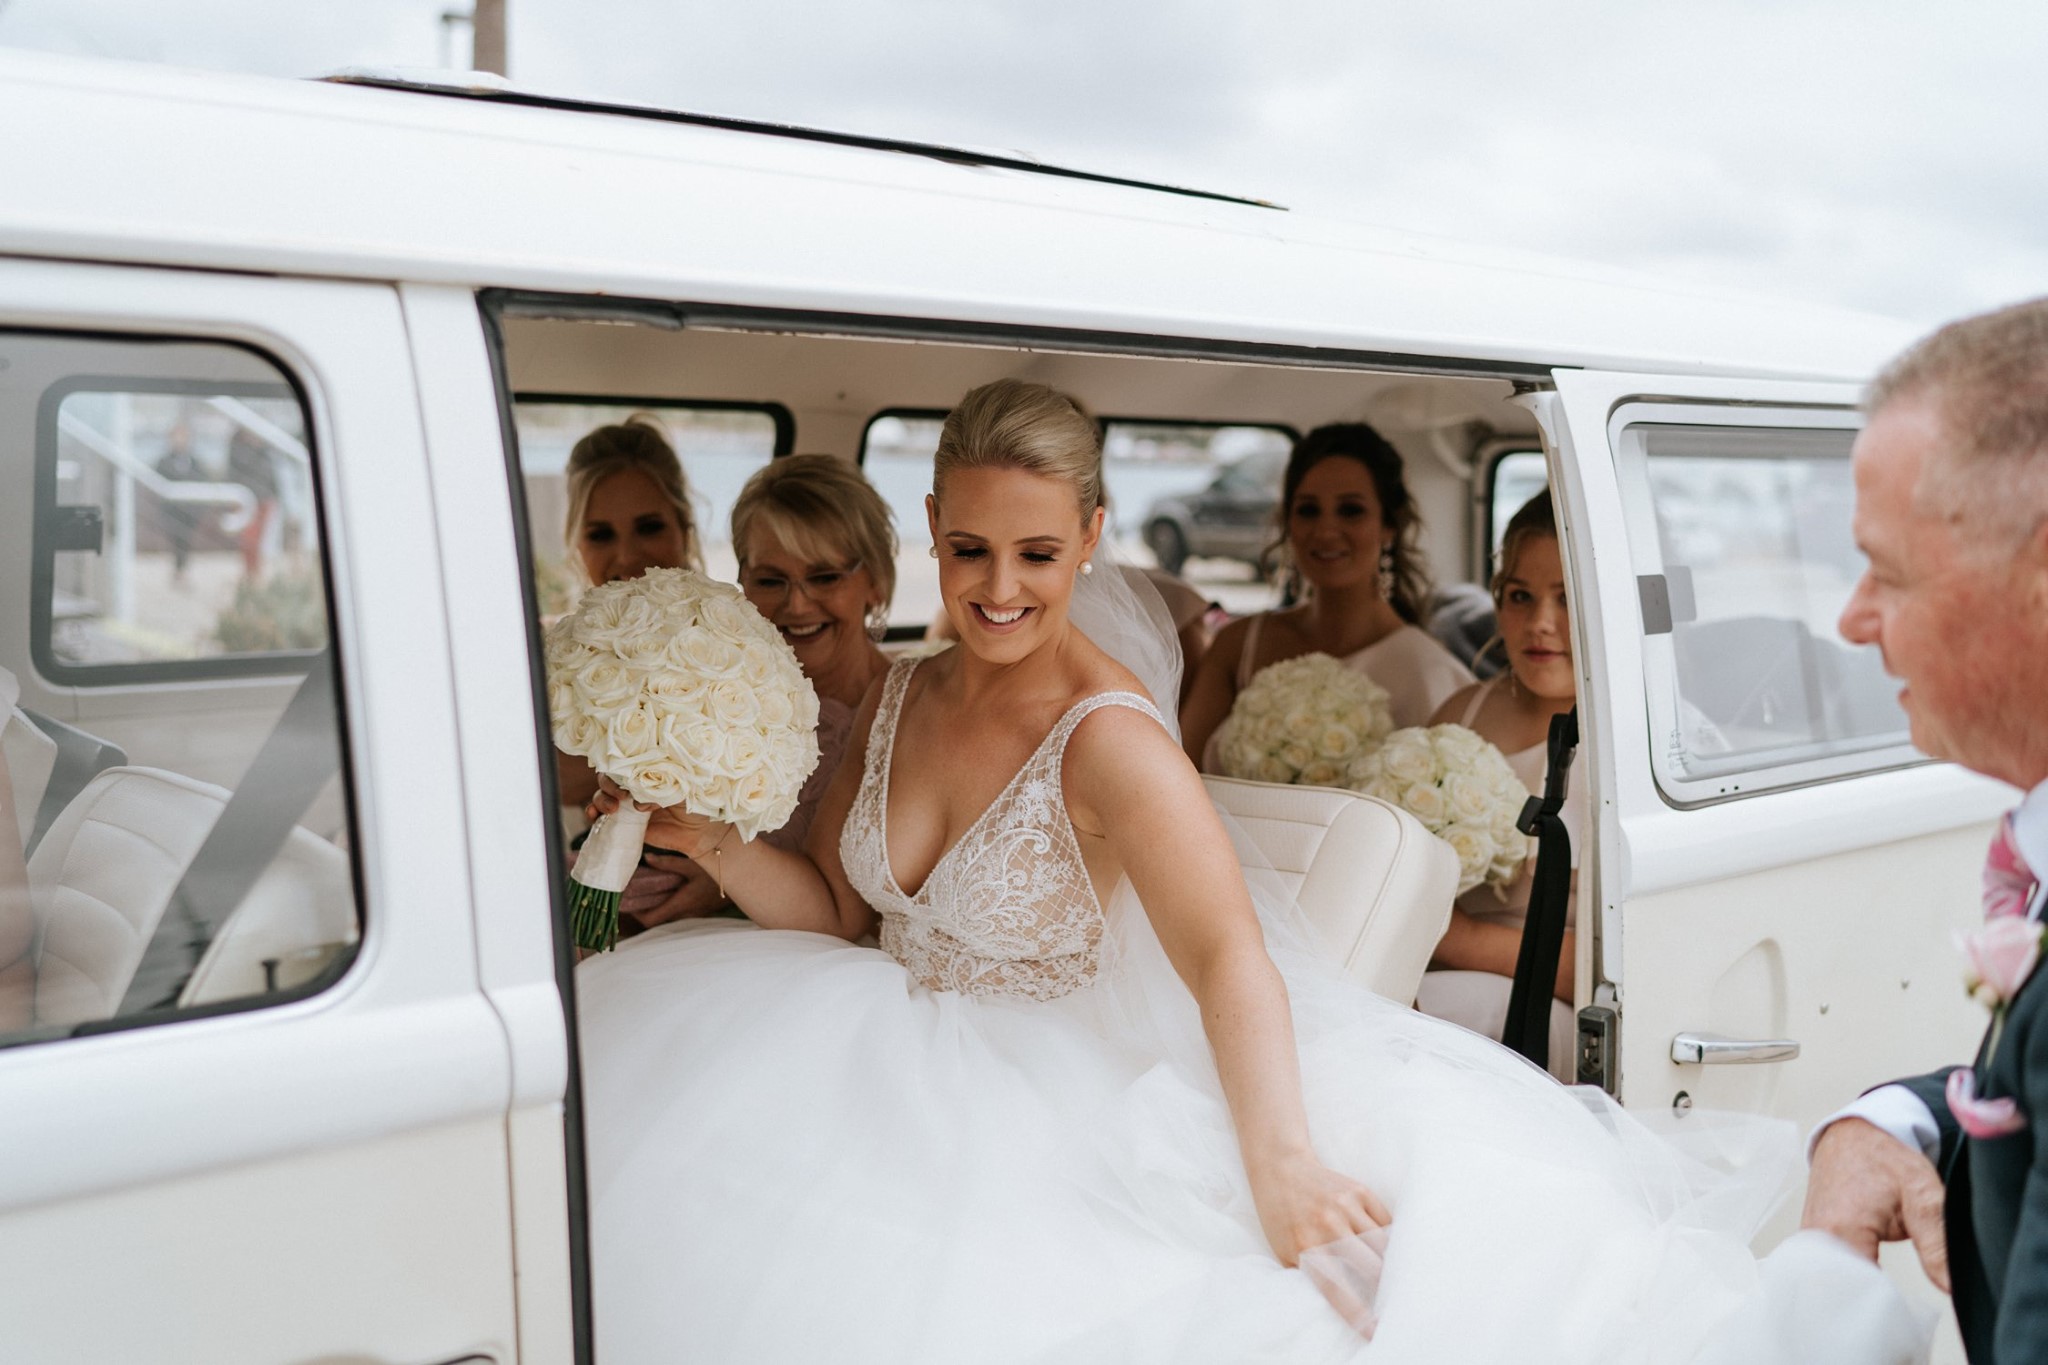 Real Wedding Stories - The Pier Geelong